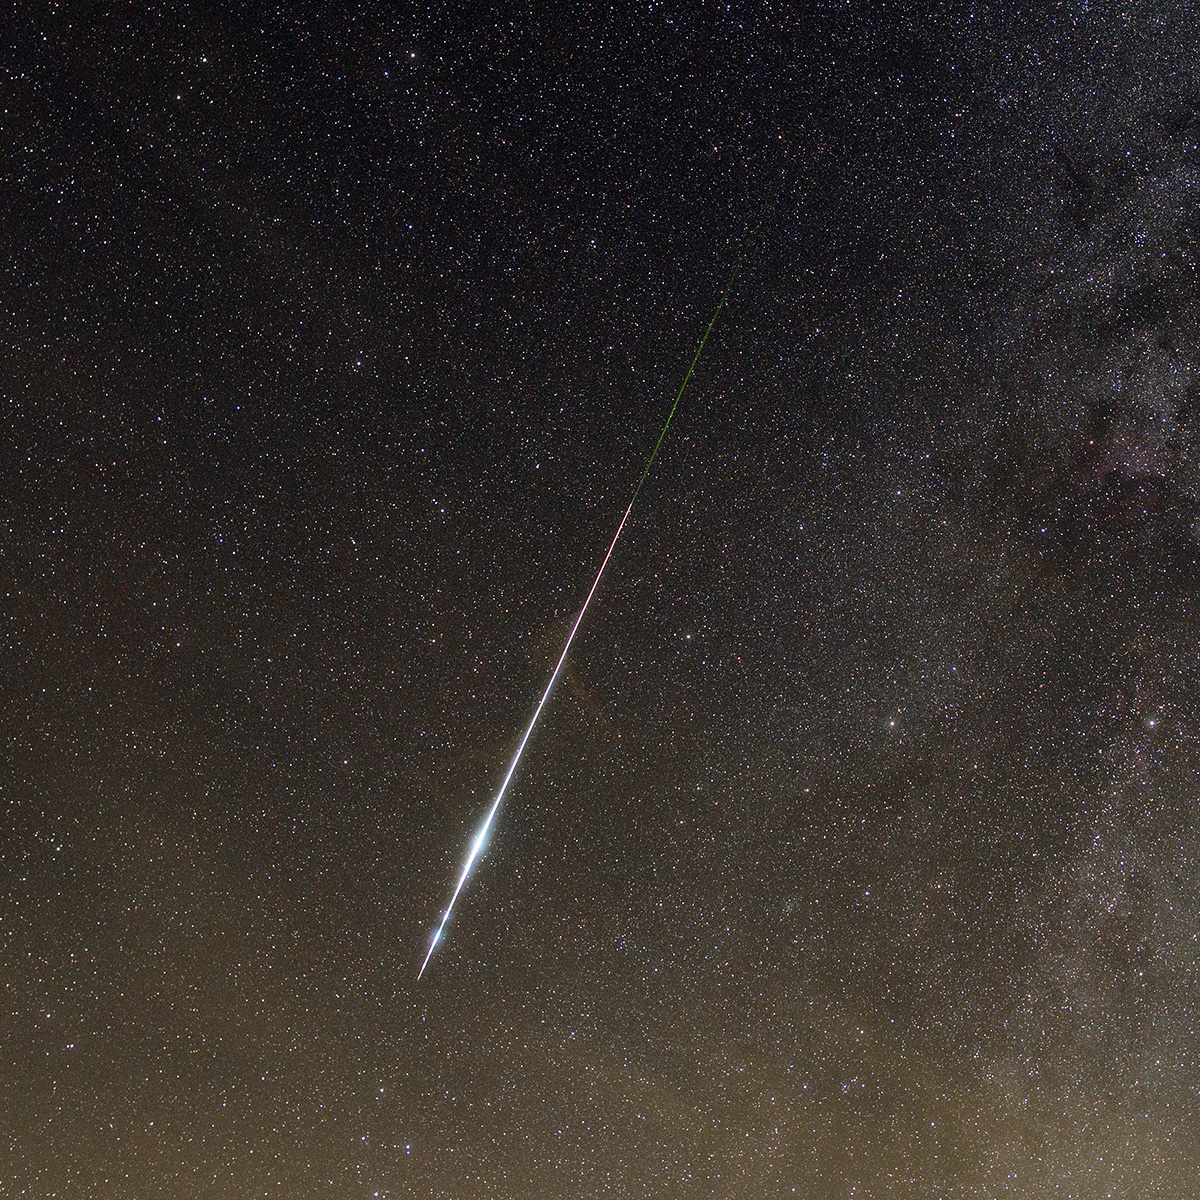 Perseids meteor shower peaks tonight; Here’s what you need to know to